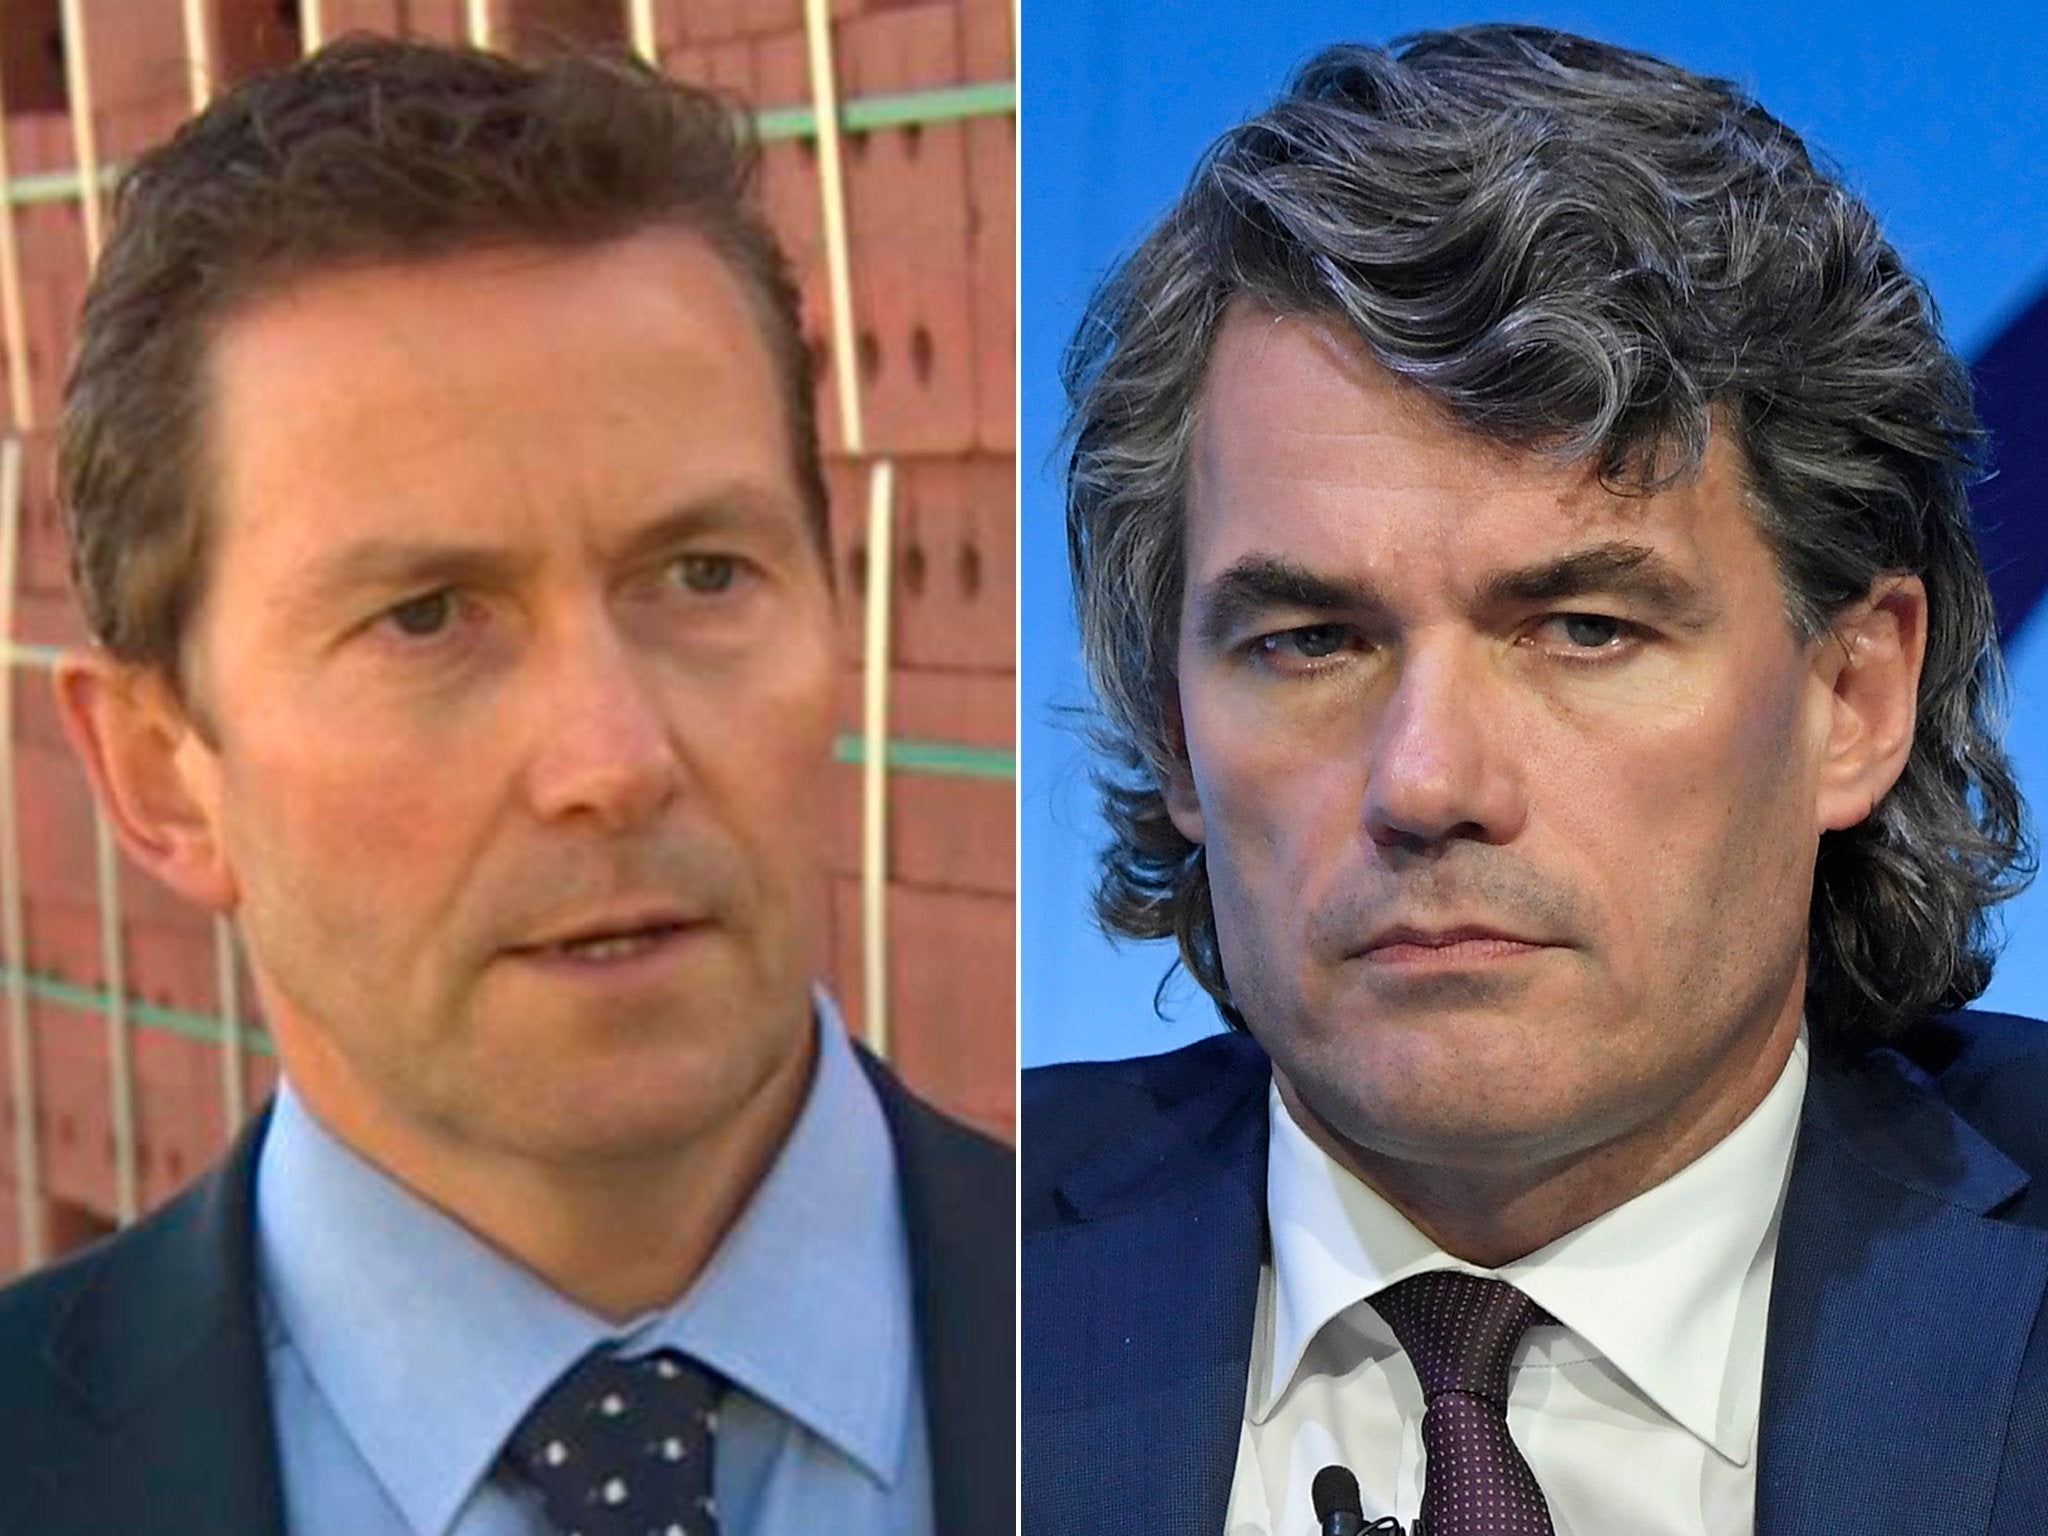 The pay packages of former Persimmon boss Jeff Fairburn and BT boss Gavin Patterson have angered MPs